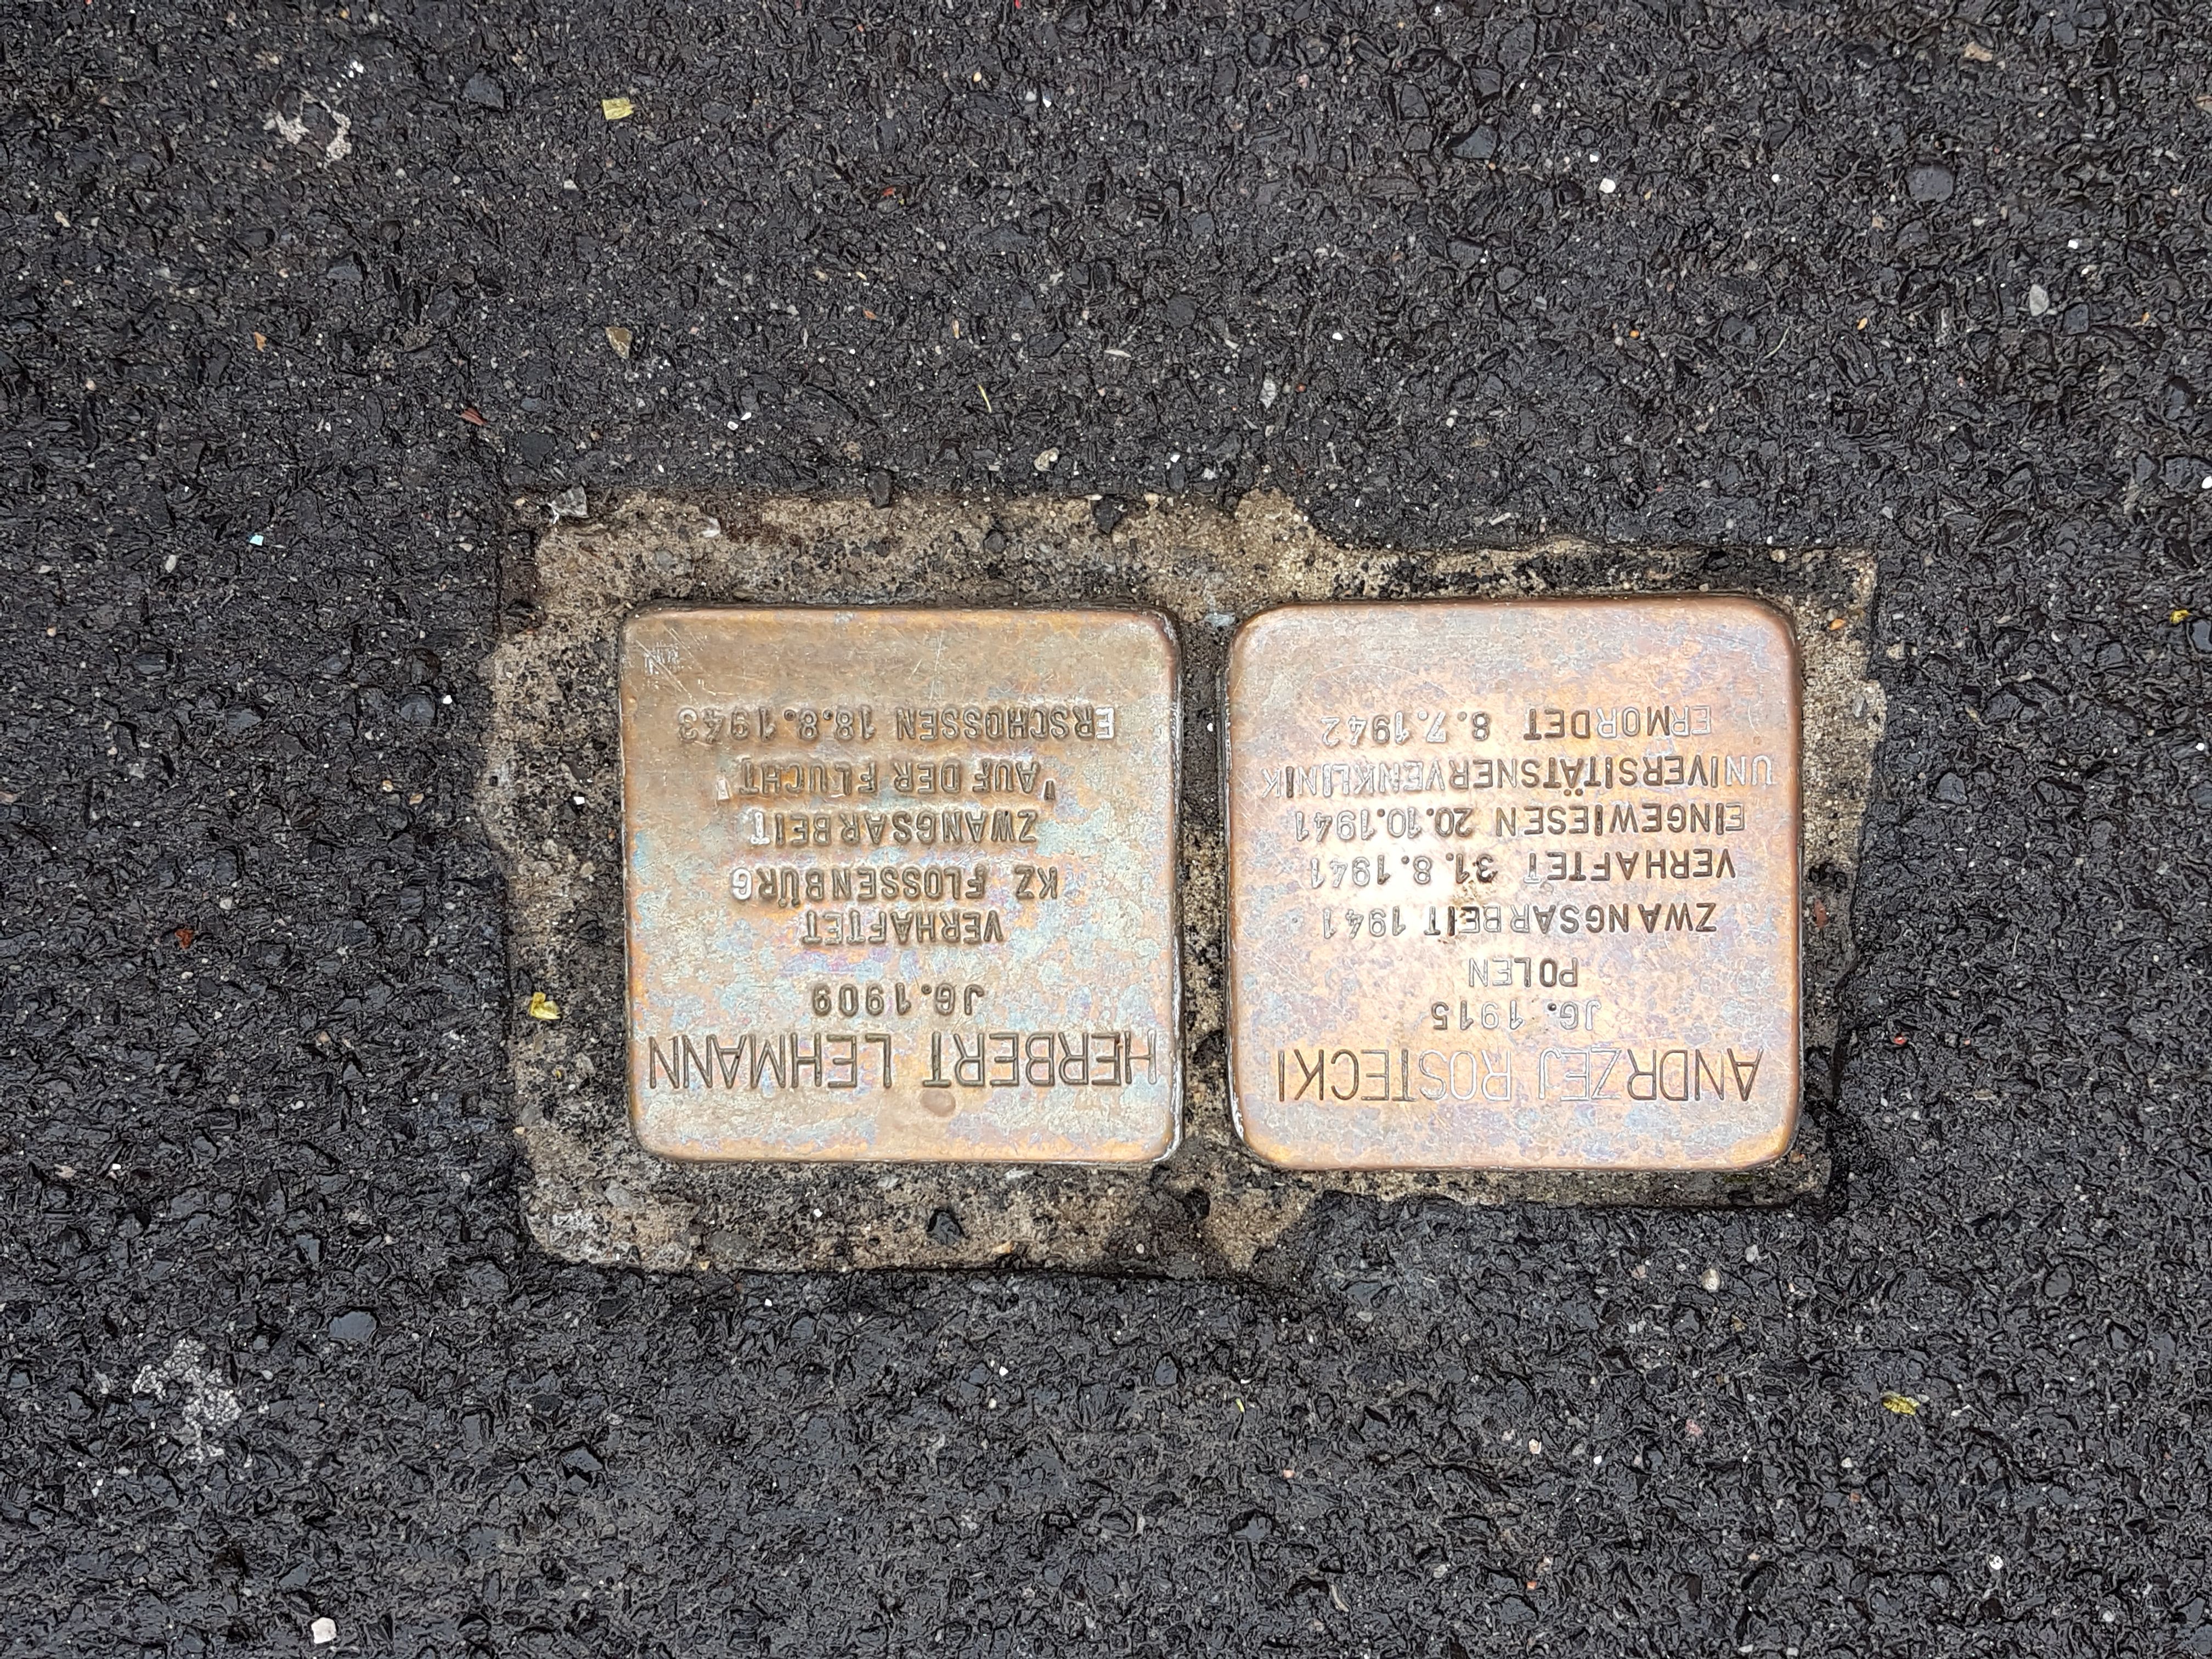 Stumbling blocks laid in front of the clinic in memory of victims of National Socialism (Herbert Lehmann, 2008; Andrzej Rostecki, 2017)